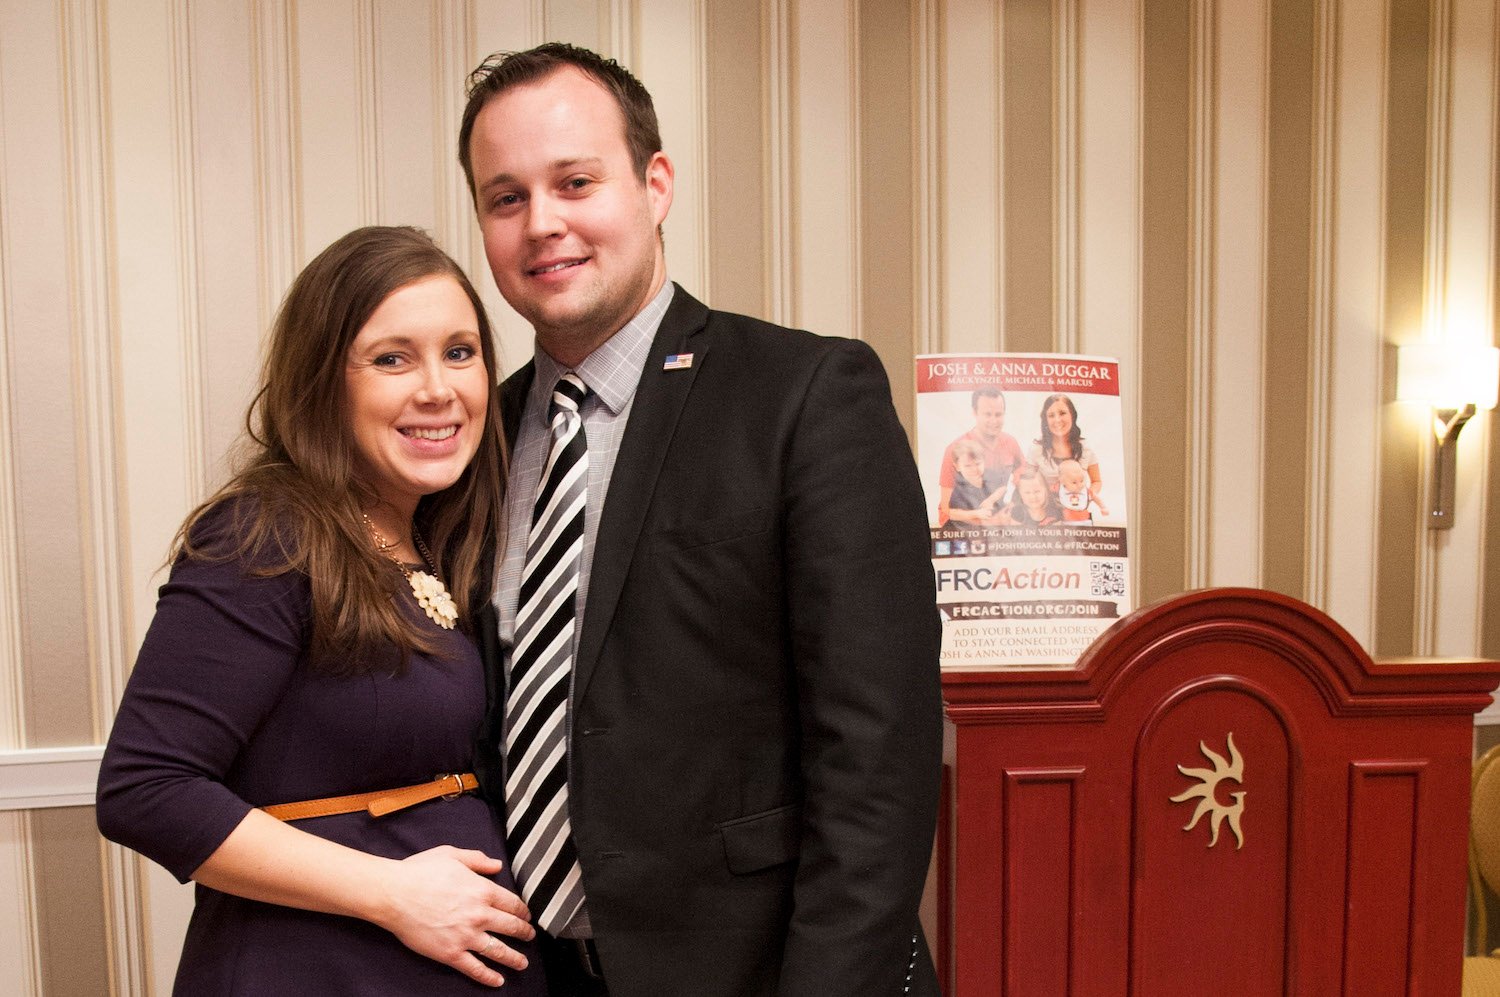 Anna Duggar and Josh Duggar pose together at a conference